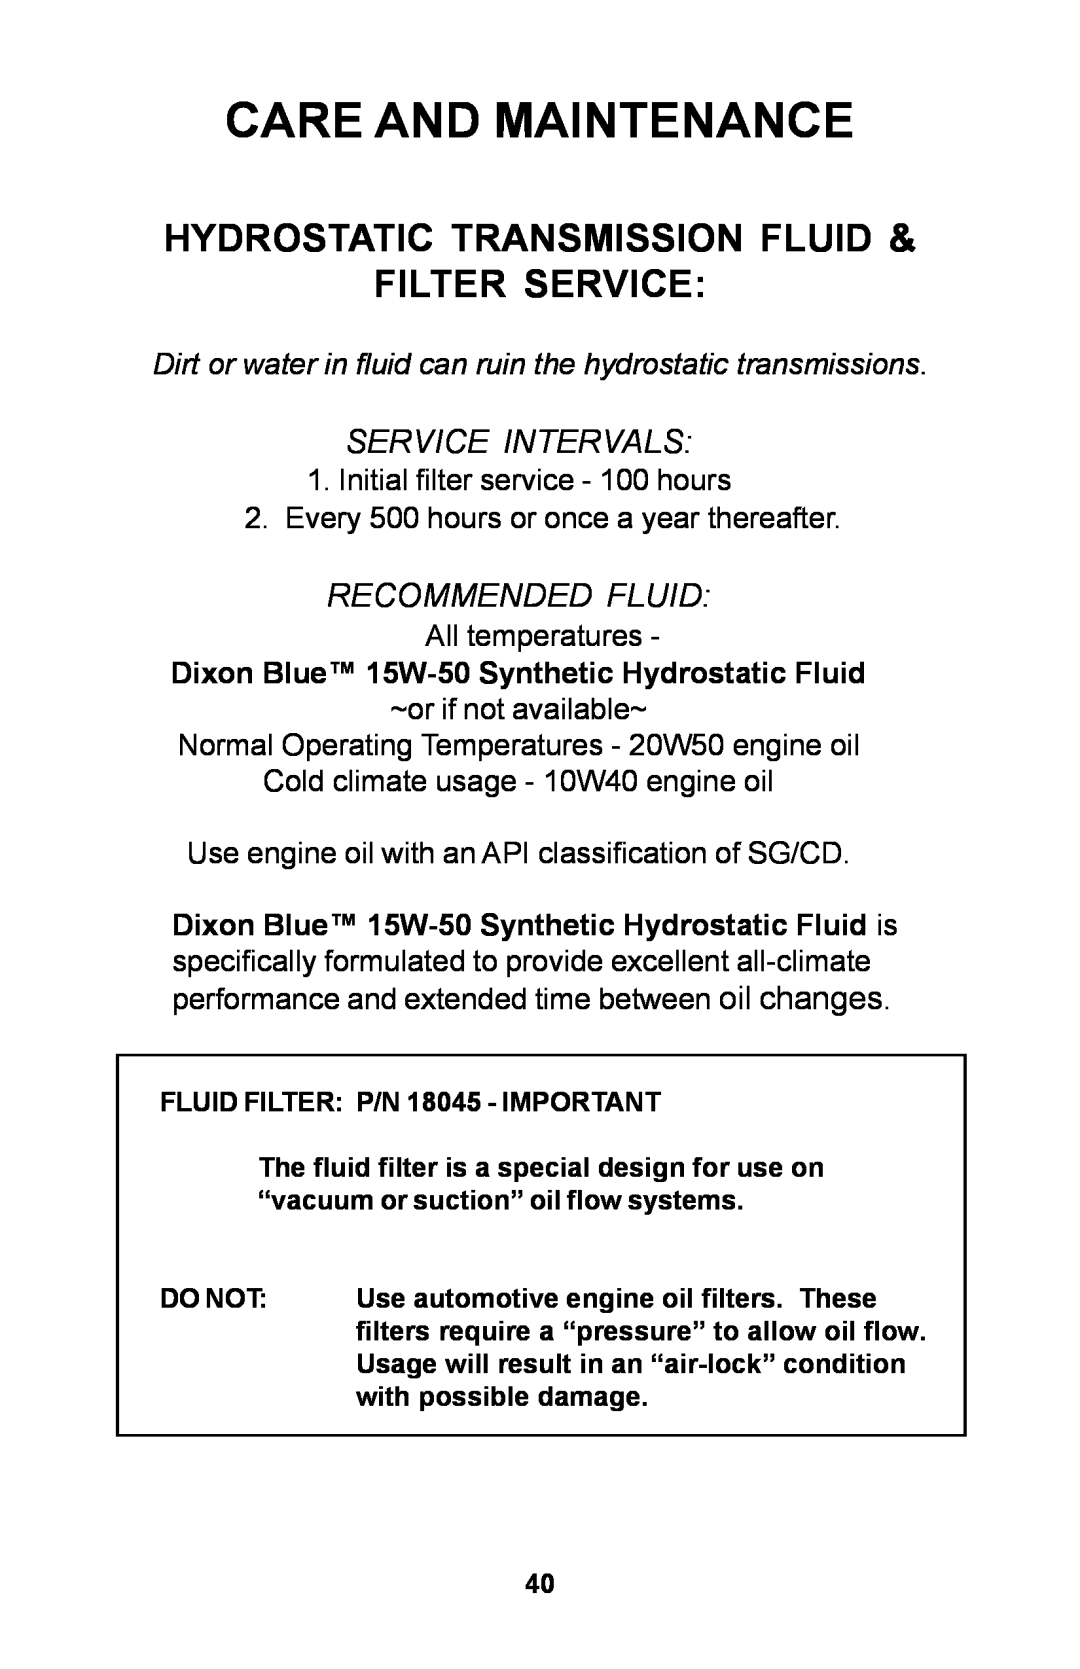 Dixon ZTR manual Hydrostatic Transmission Fluid Filter Service, Care And Maintenance, Service Intervals, Recommended Fluid 